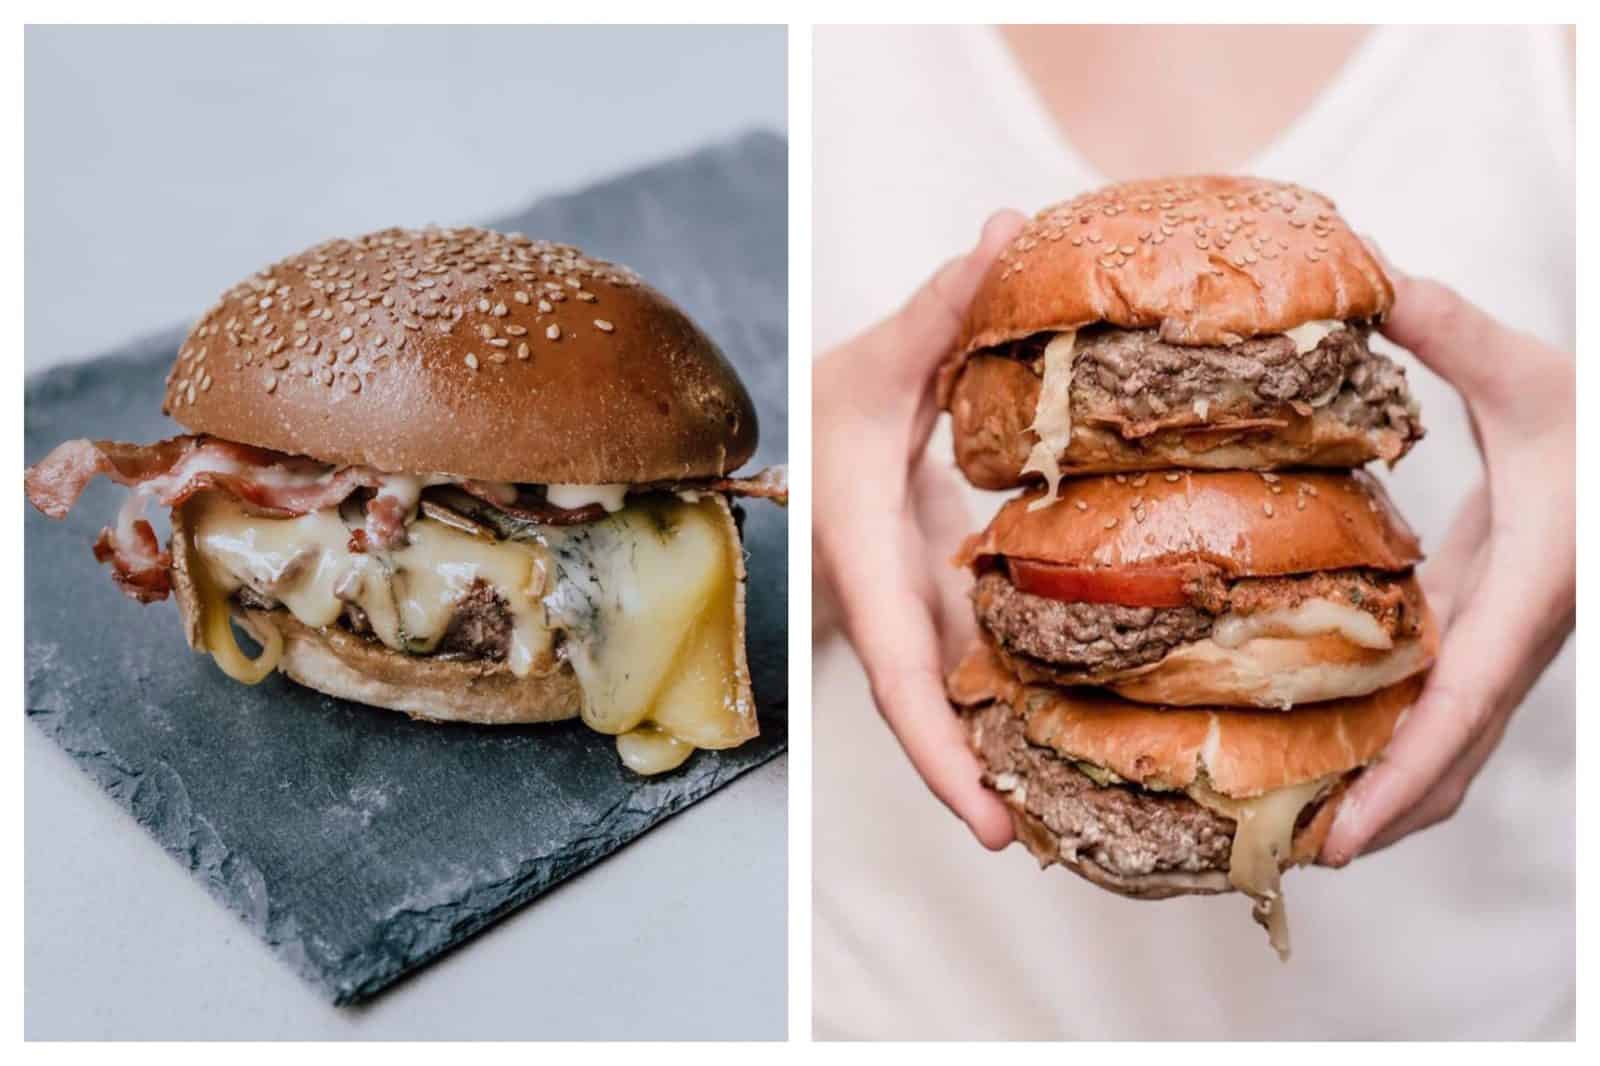 The place to go for an organic burger in Paris is Bio Burger for its generously filled buns with melted cheese and bacon served on slate boards (left). Or you can go for the straight-forward juicy beef burger like one of these three, which this girl is holding stacked together (right).